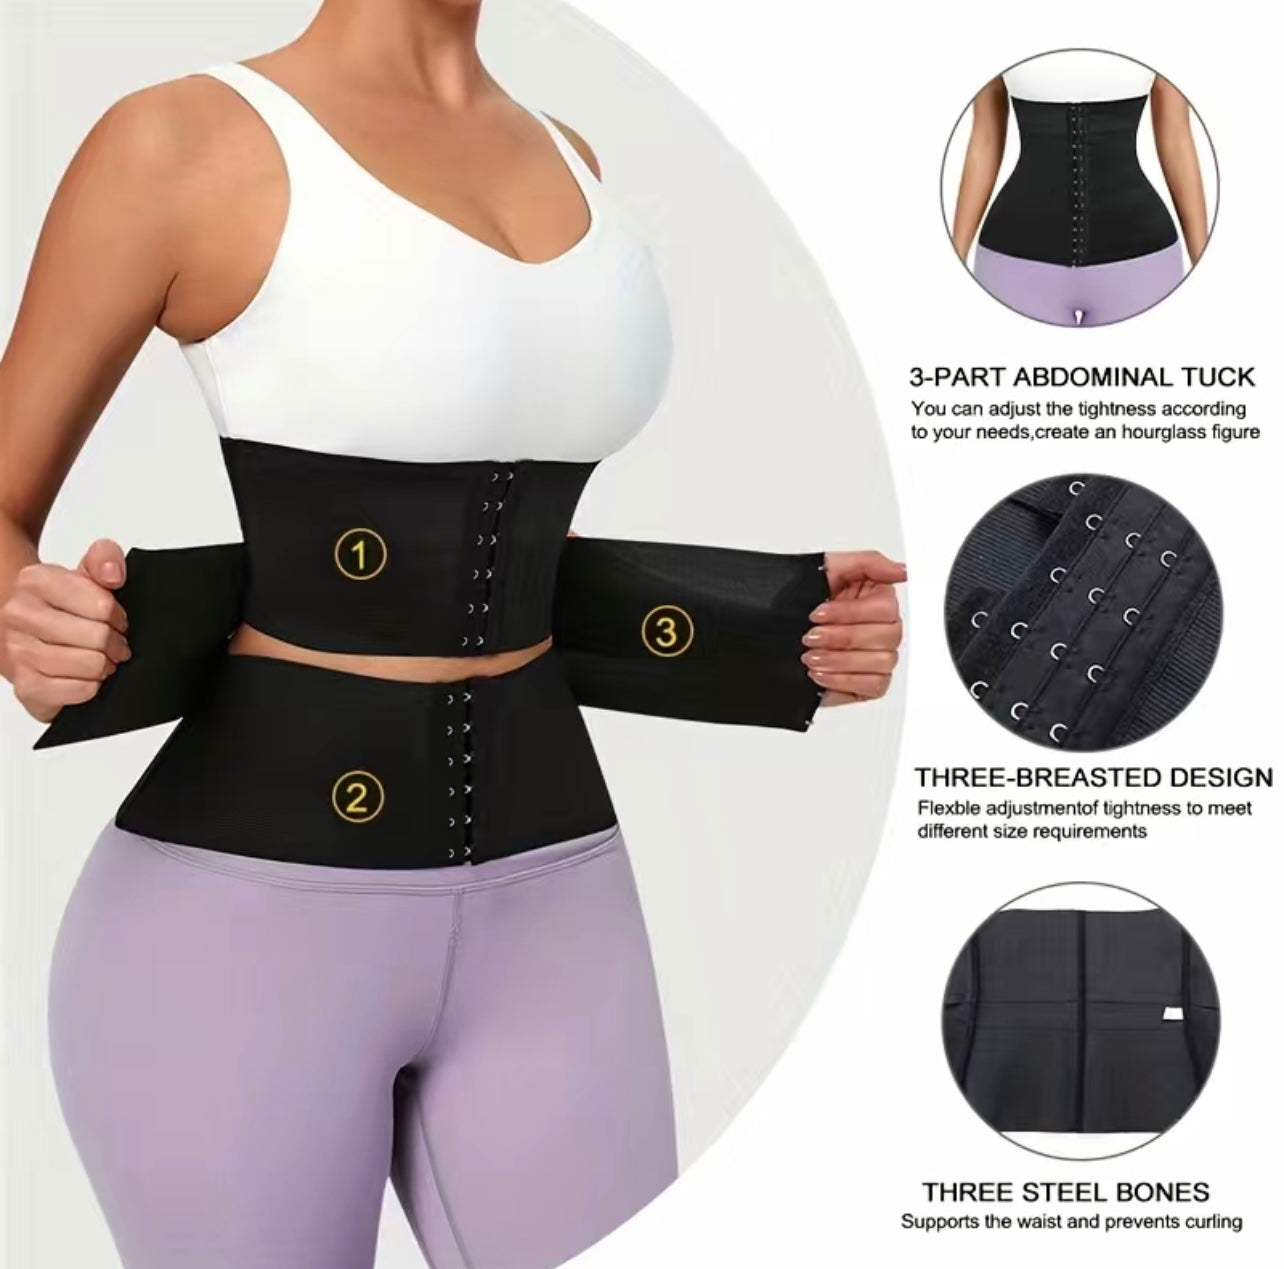 The Best Exercises for a Smaller Waist, Trainers Explain - Parade